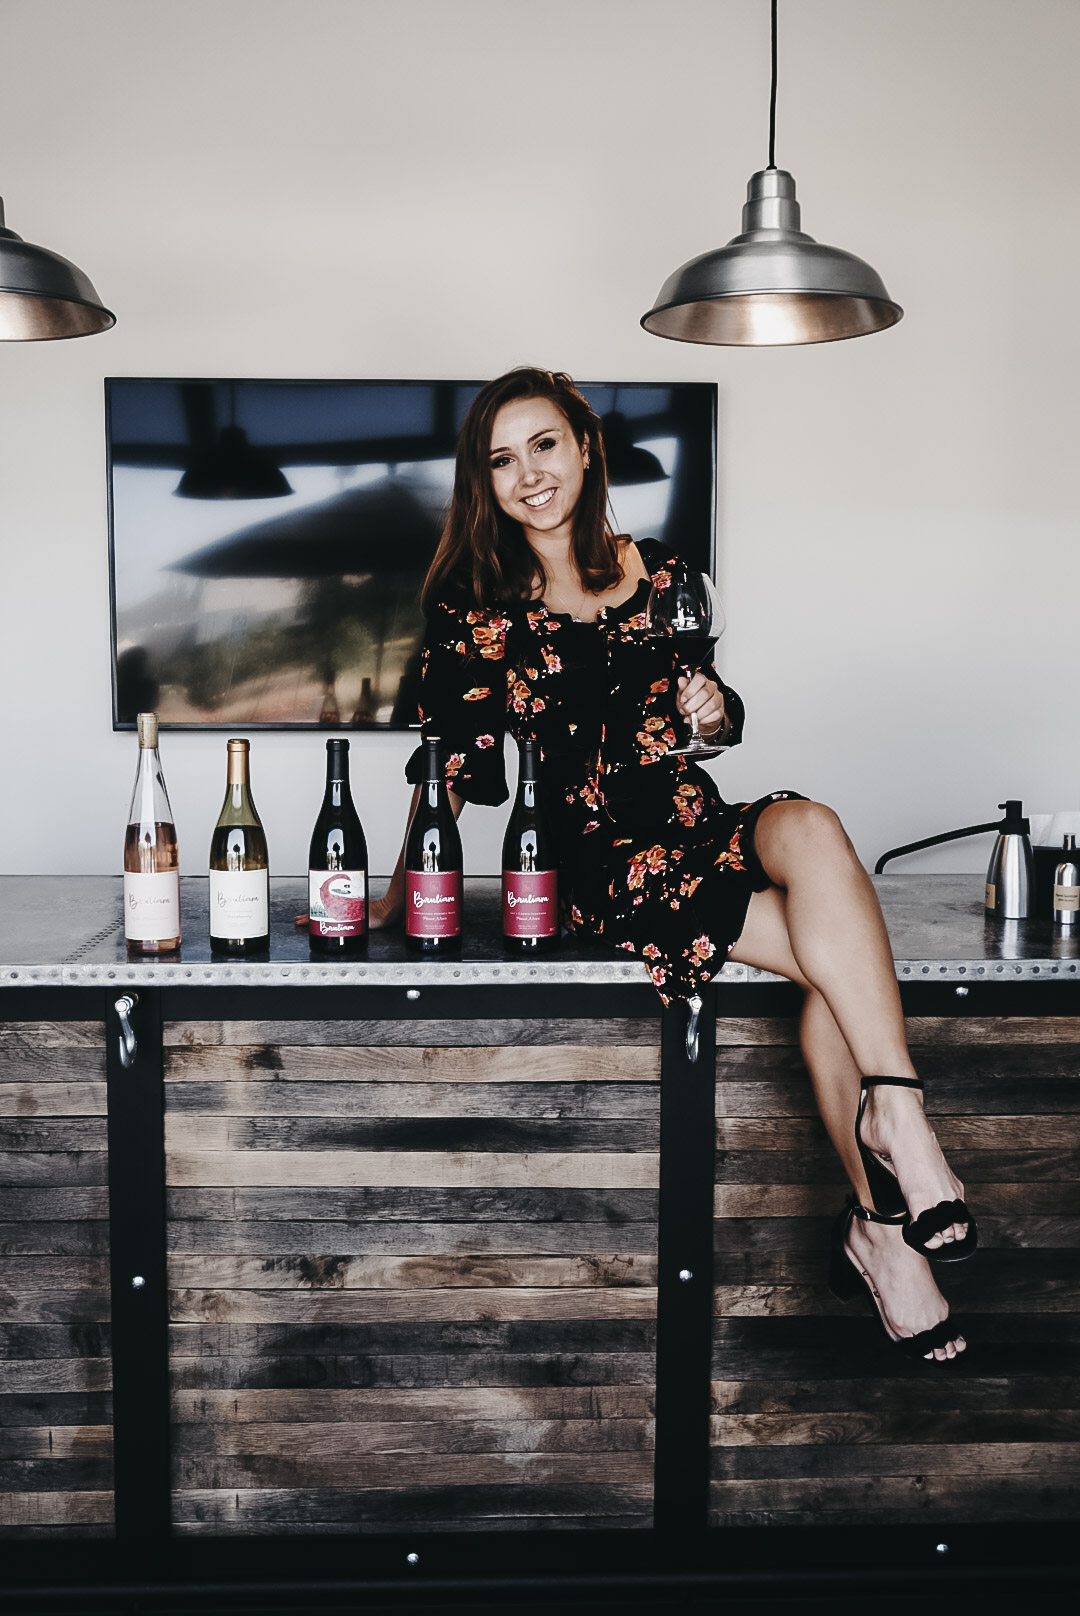 Paige sitting on top of a bar with an assortment of wine bottles from Bruliam